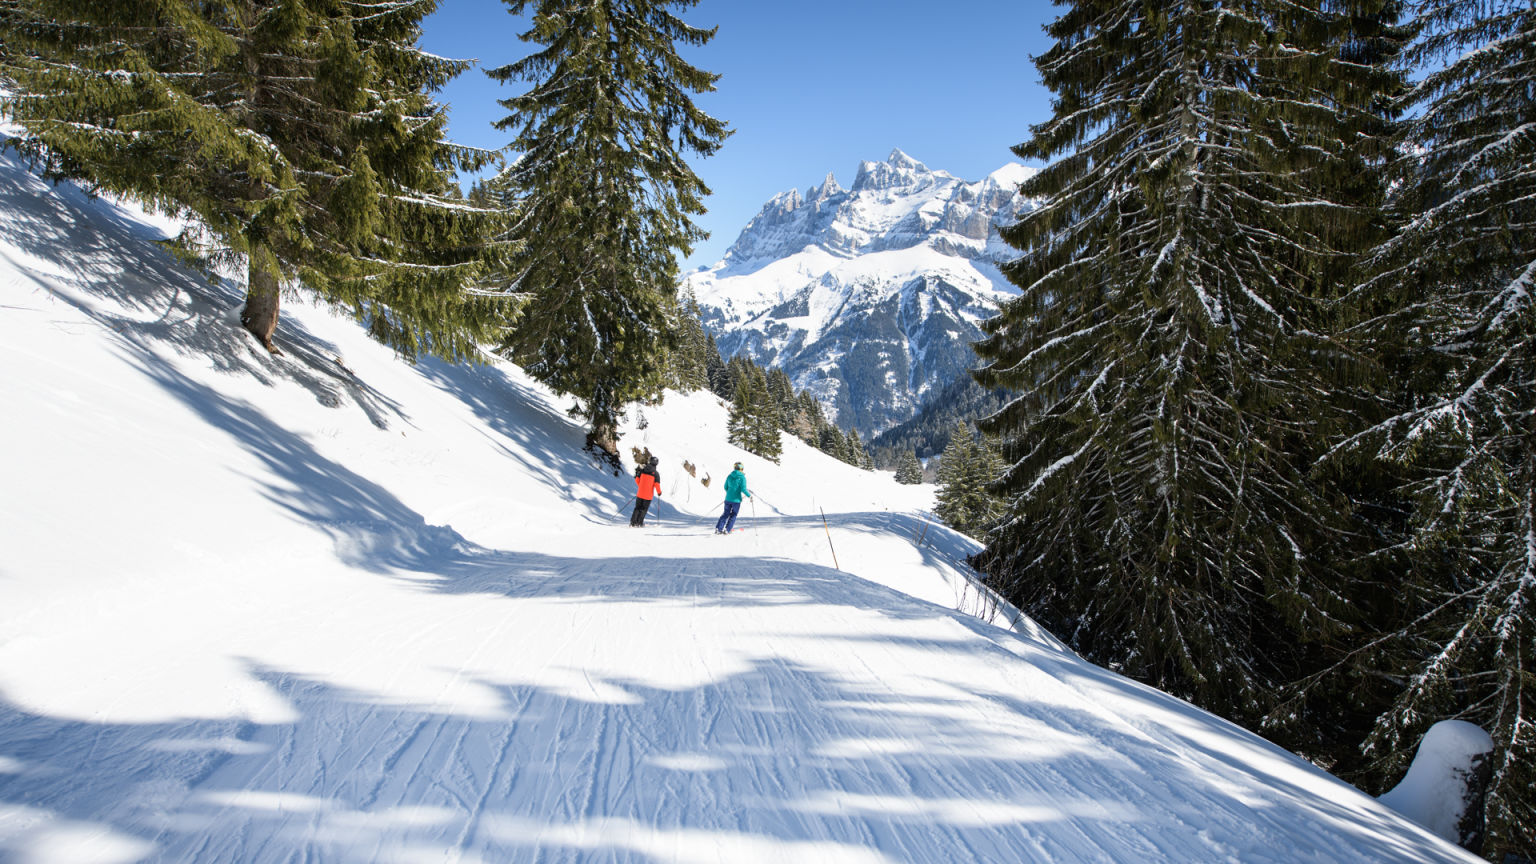 Two skiers going down the Ripaille - Grand Paradis ski run in a forest path in Champéry, Valais, Switzerland